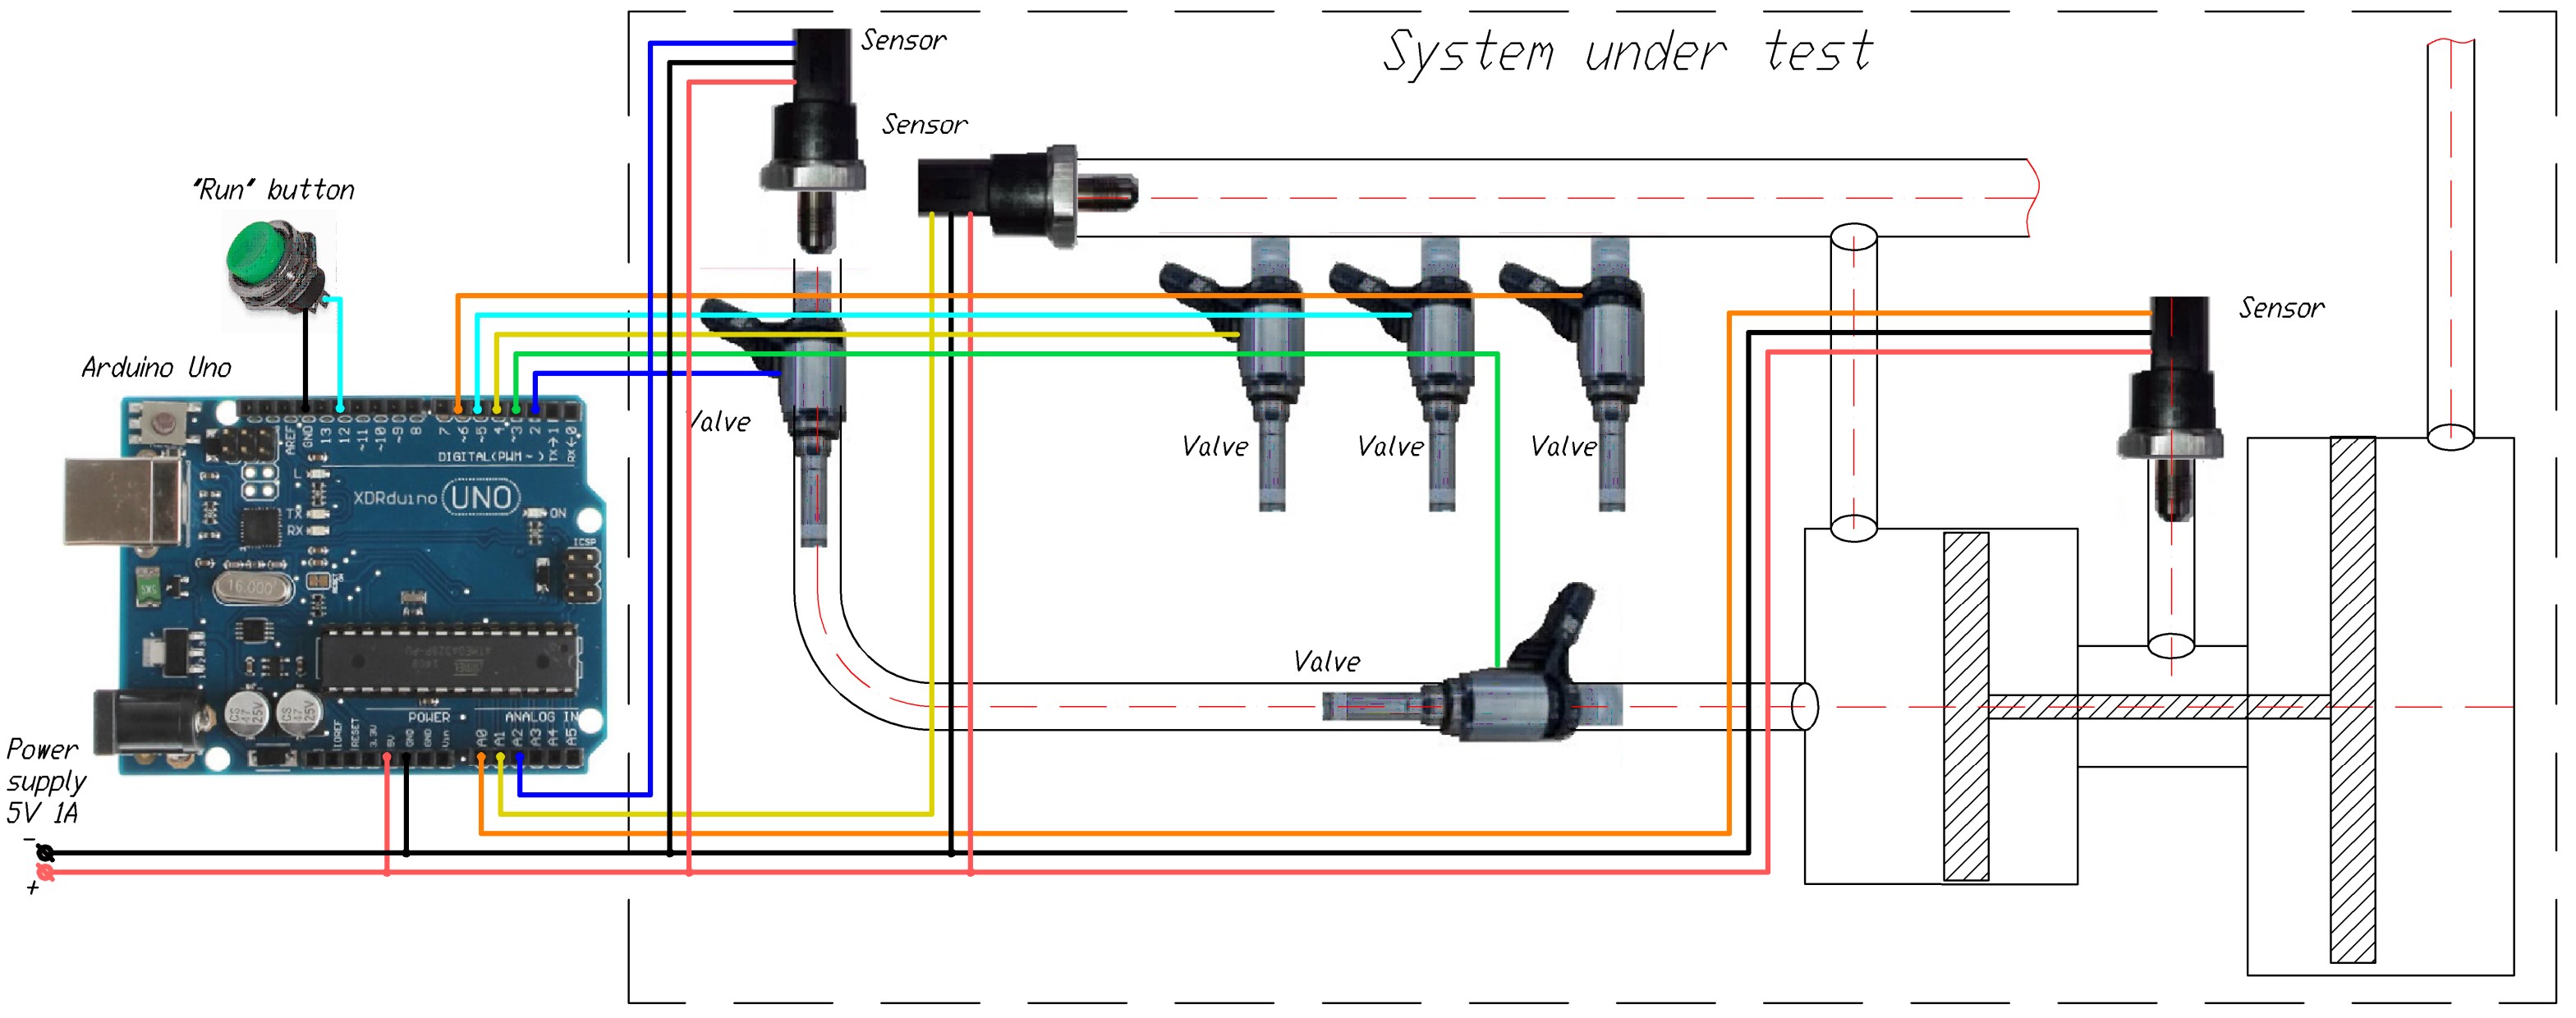 Wiring diagram with example of system under test